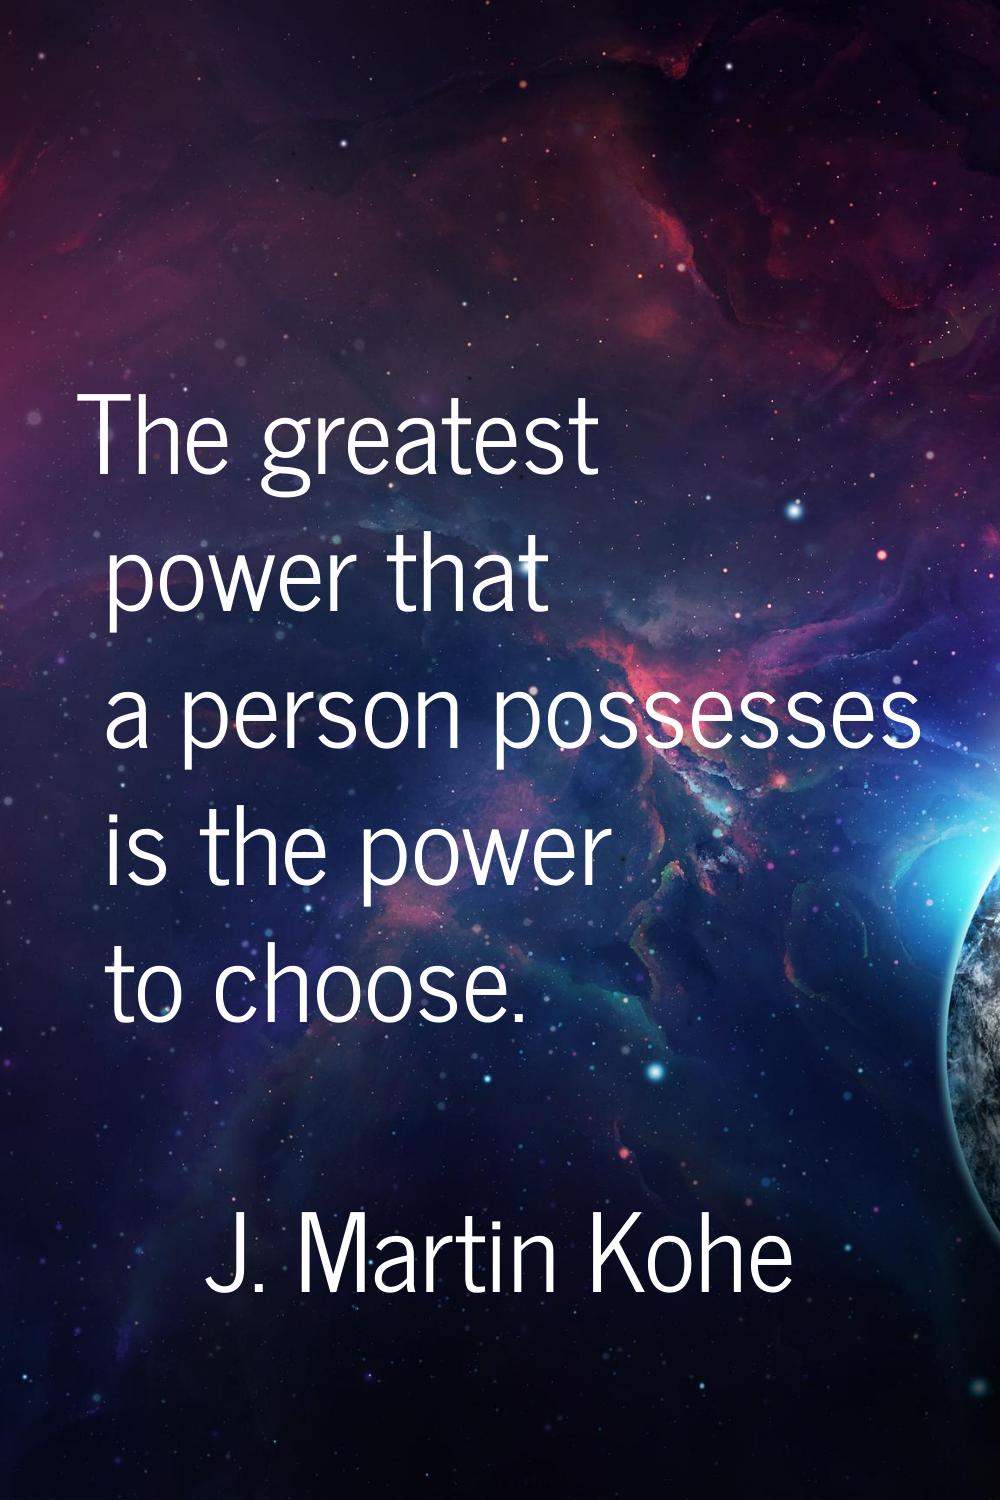 The greatest power that a person possesses is the power to choose.